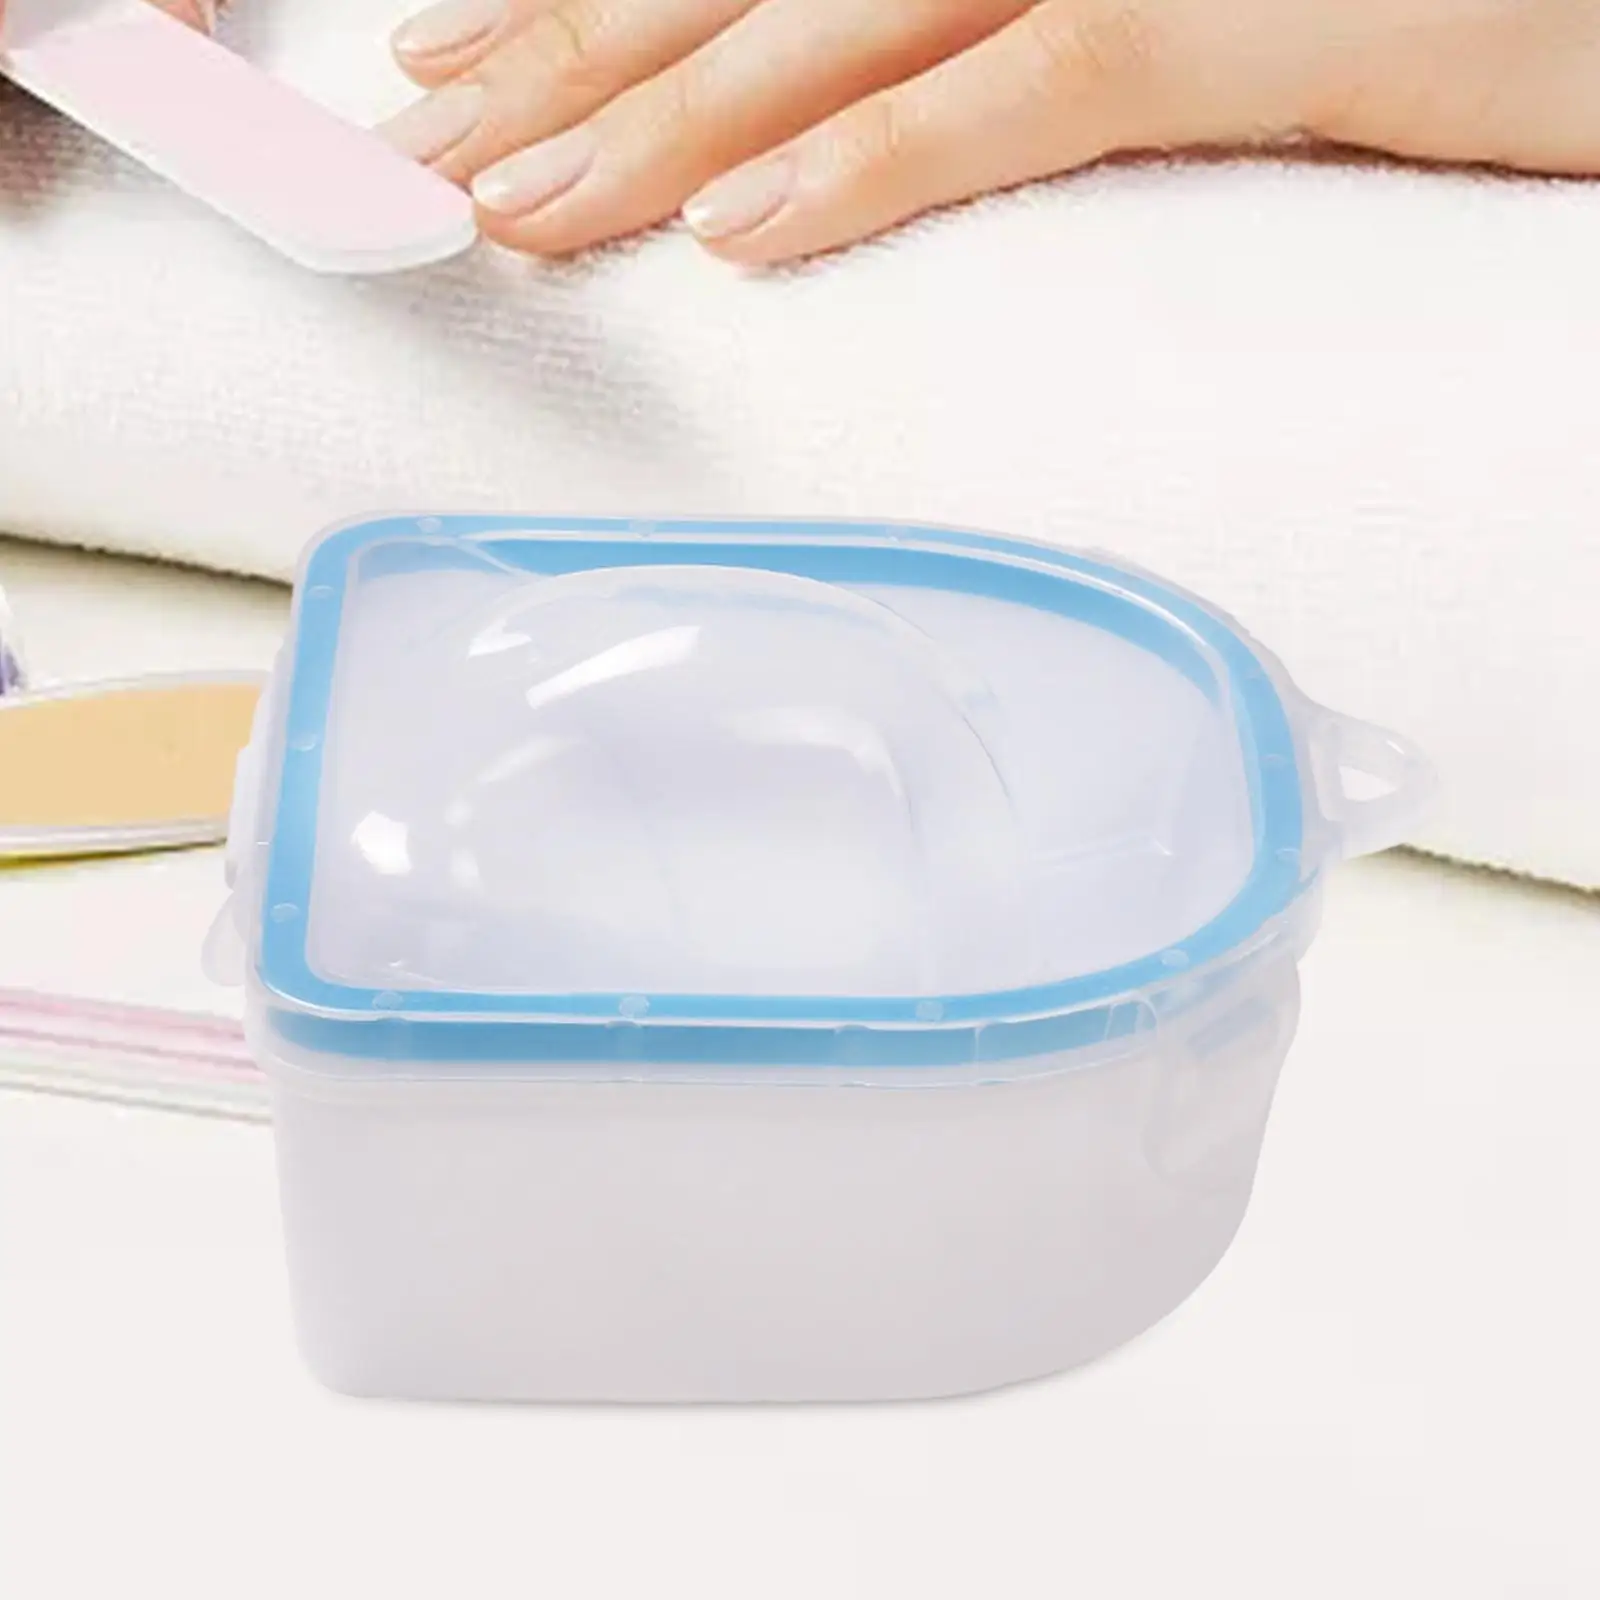 Nail Soak Off Bowl Accessories Easy to Use Quality Manicure SPA Tool Dip Powder Remover Tool for Hands Nails Household